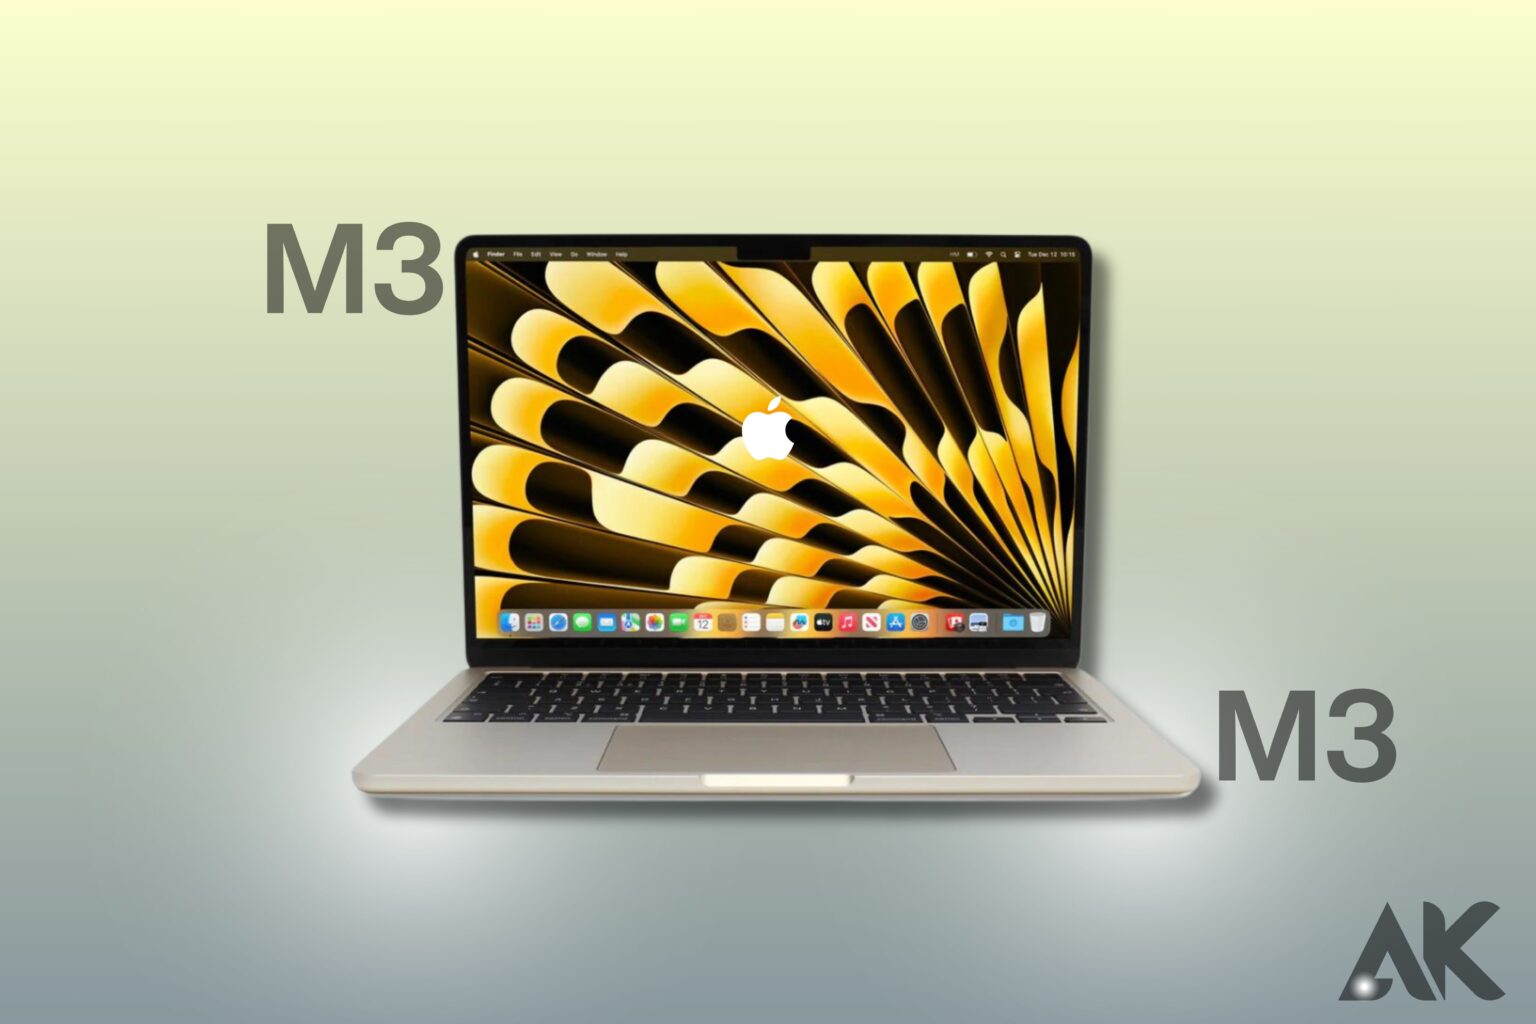 Should You Upgrade to the Upcoming 15-Inch Macbook Air M3?